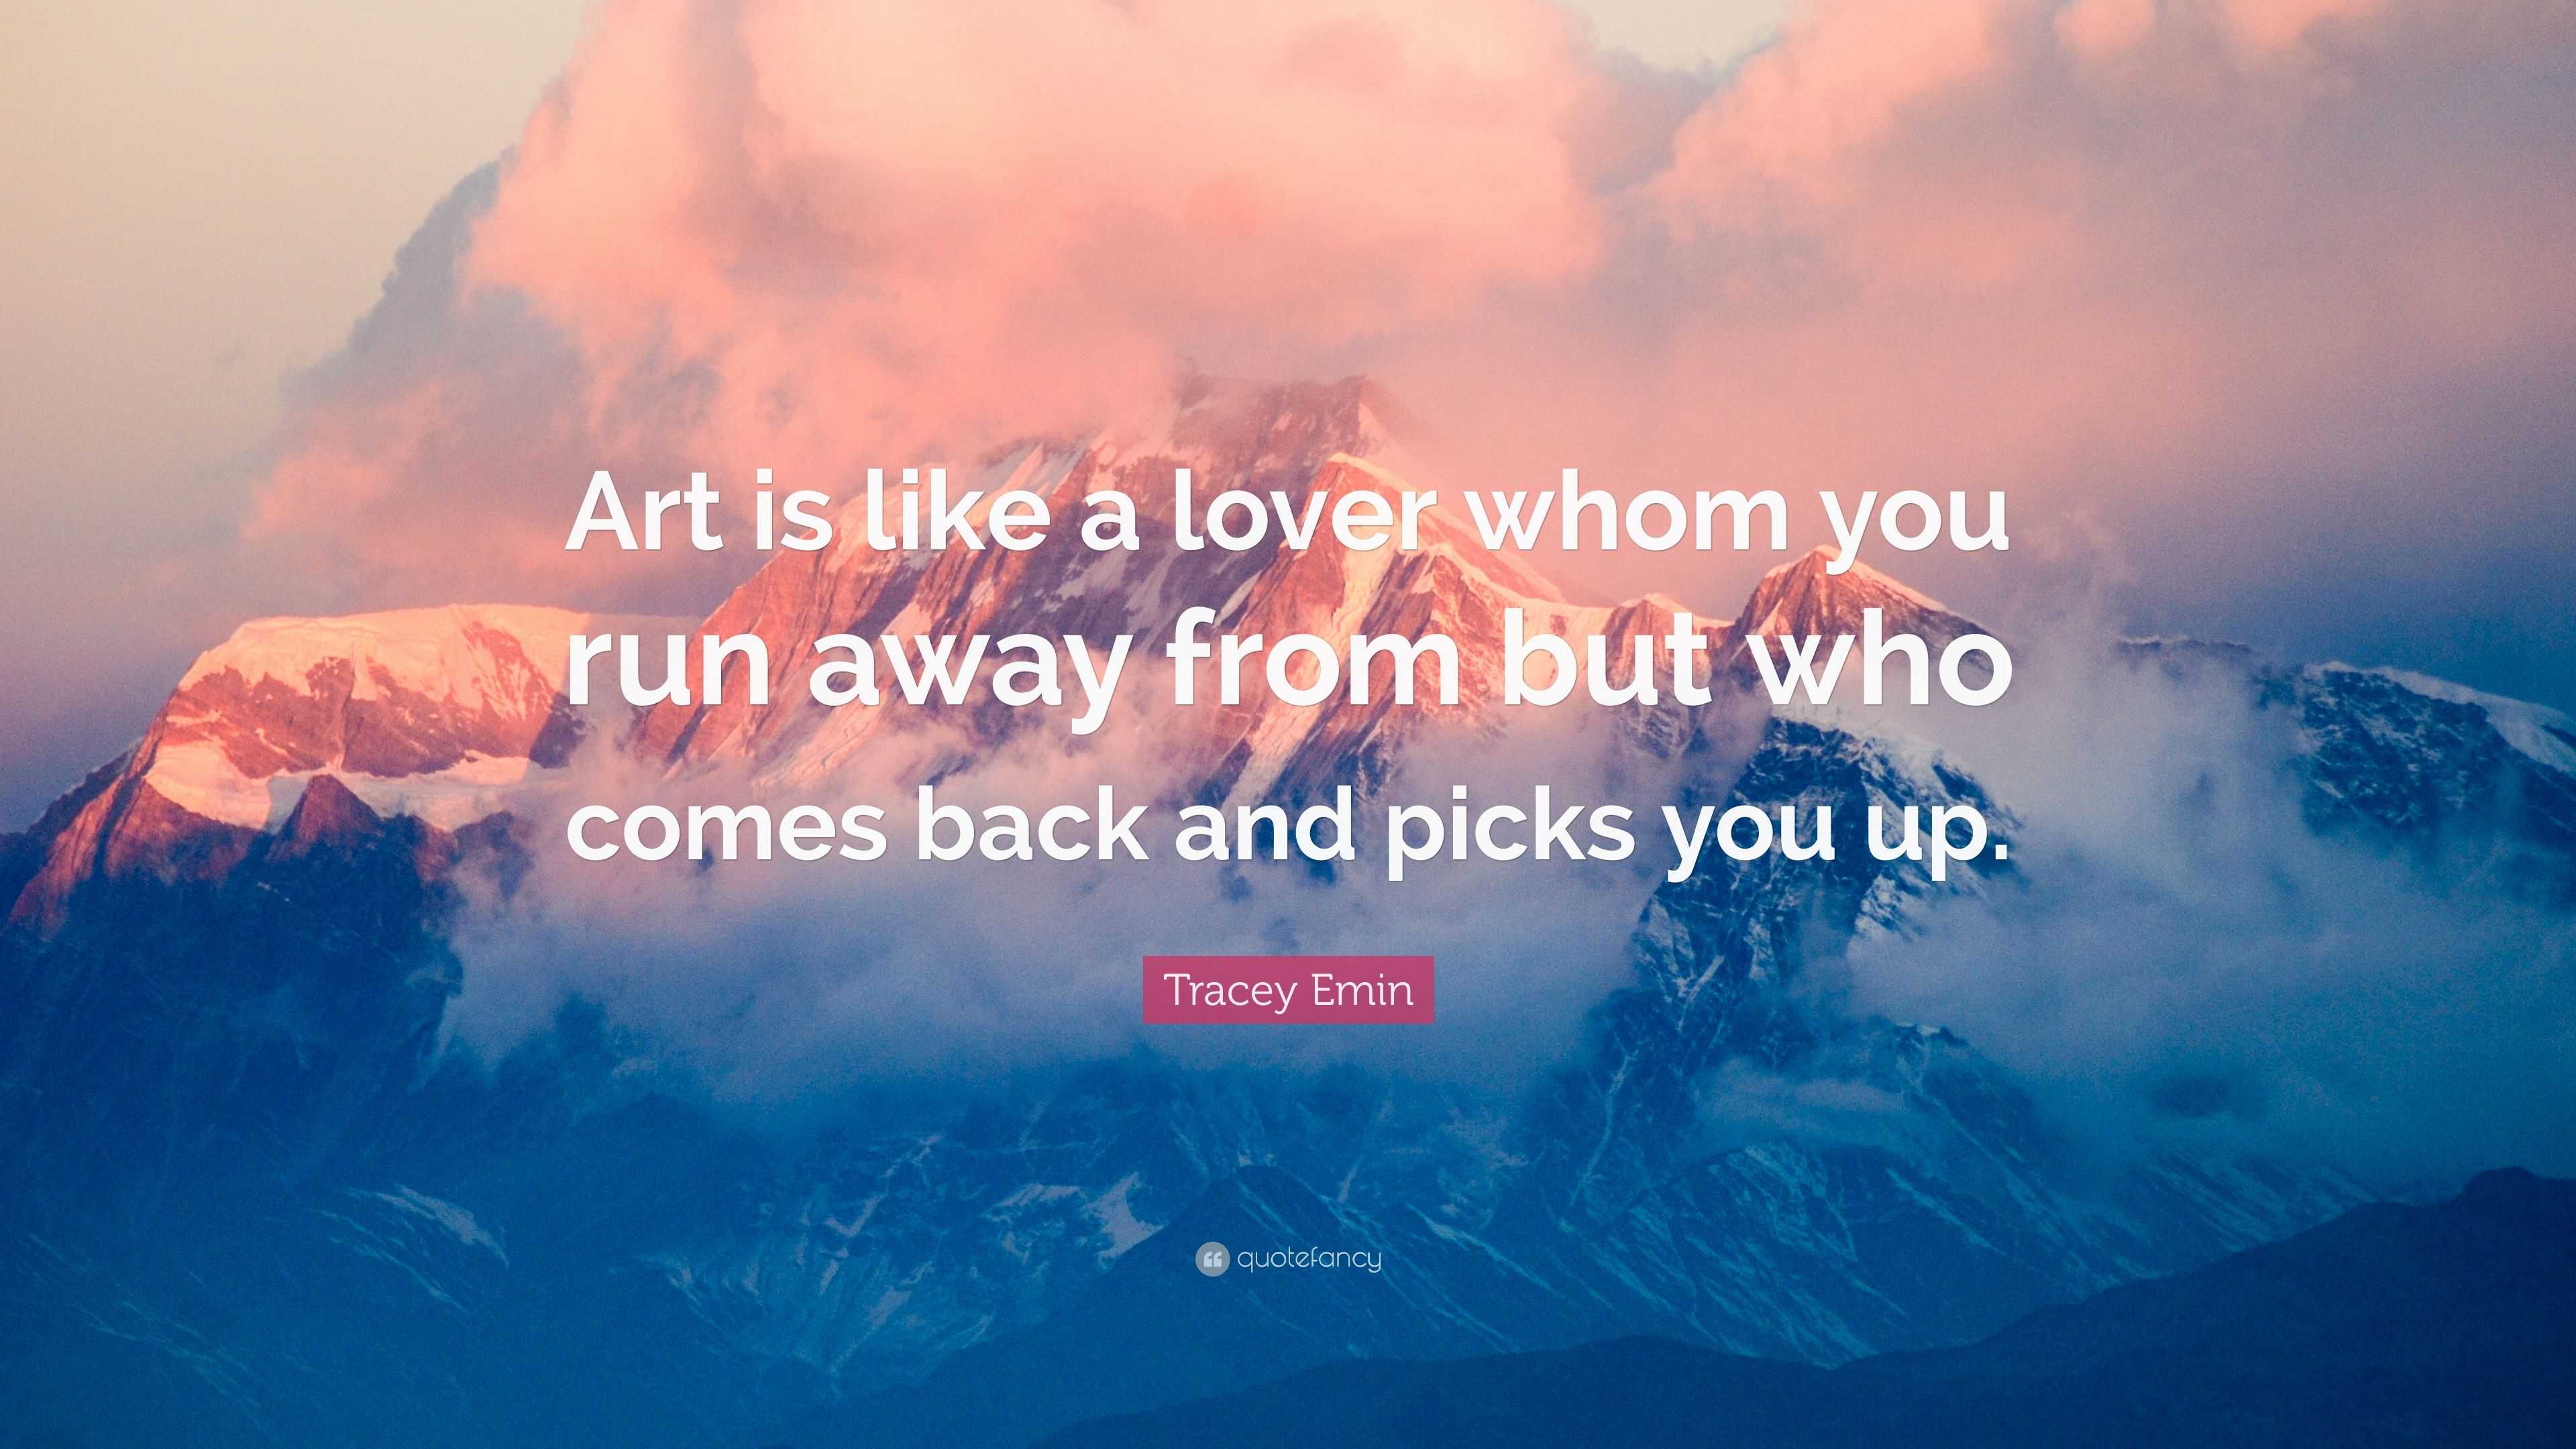 Tracey Emin Quote “Art is like a lover whom you run away from but who